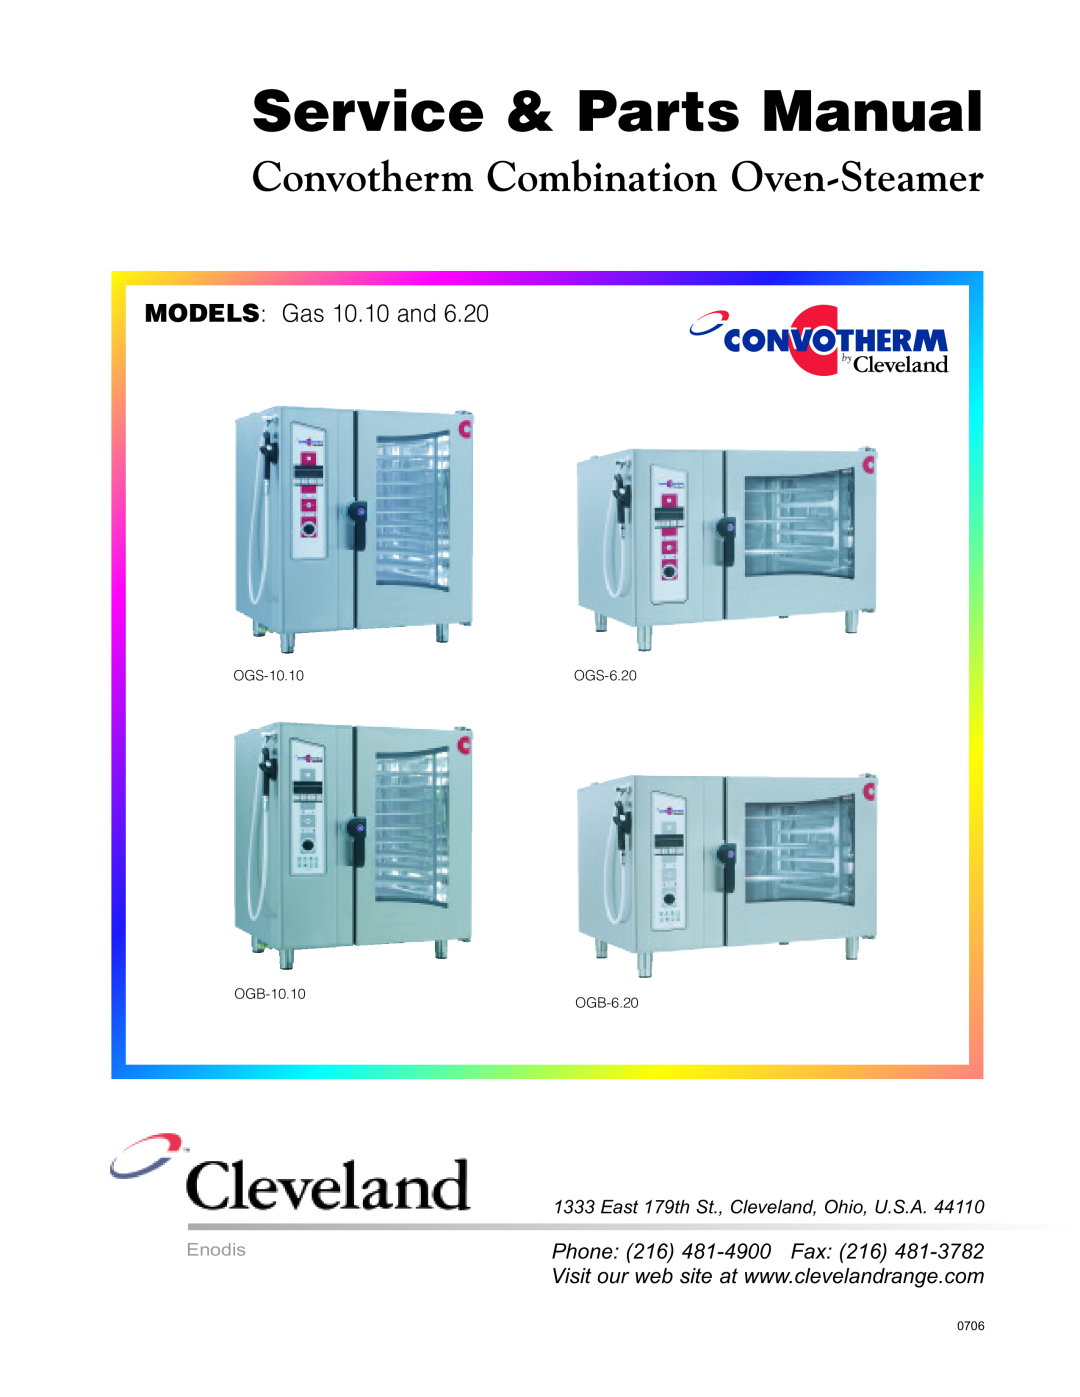 Cleveland Range OGS-6.20 manual Service & Parts Manual, Convotherm Combination Oven-Steamer, MODELS Gas 10.10 and, Enodis 